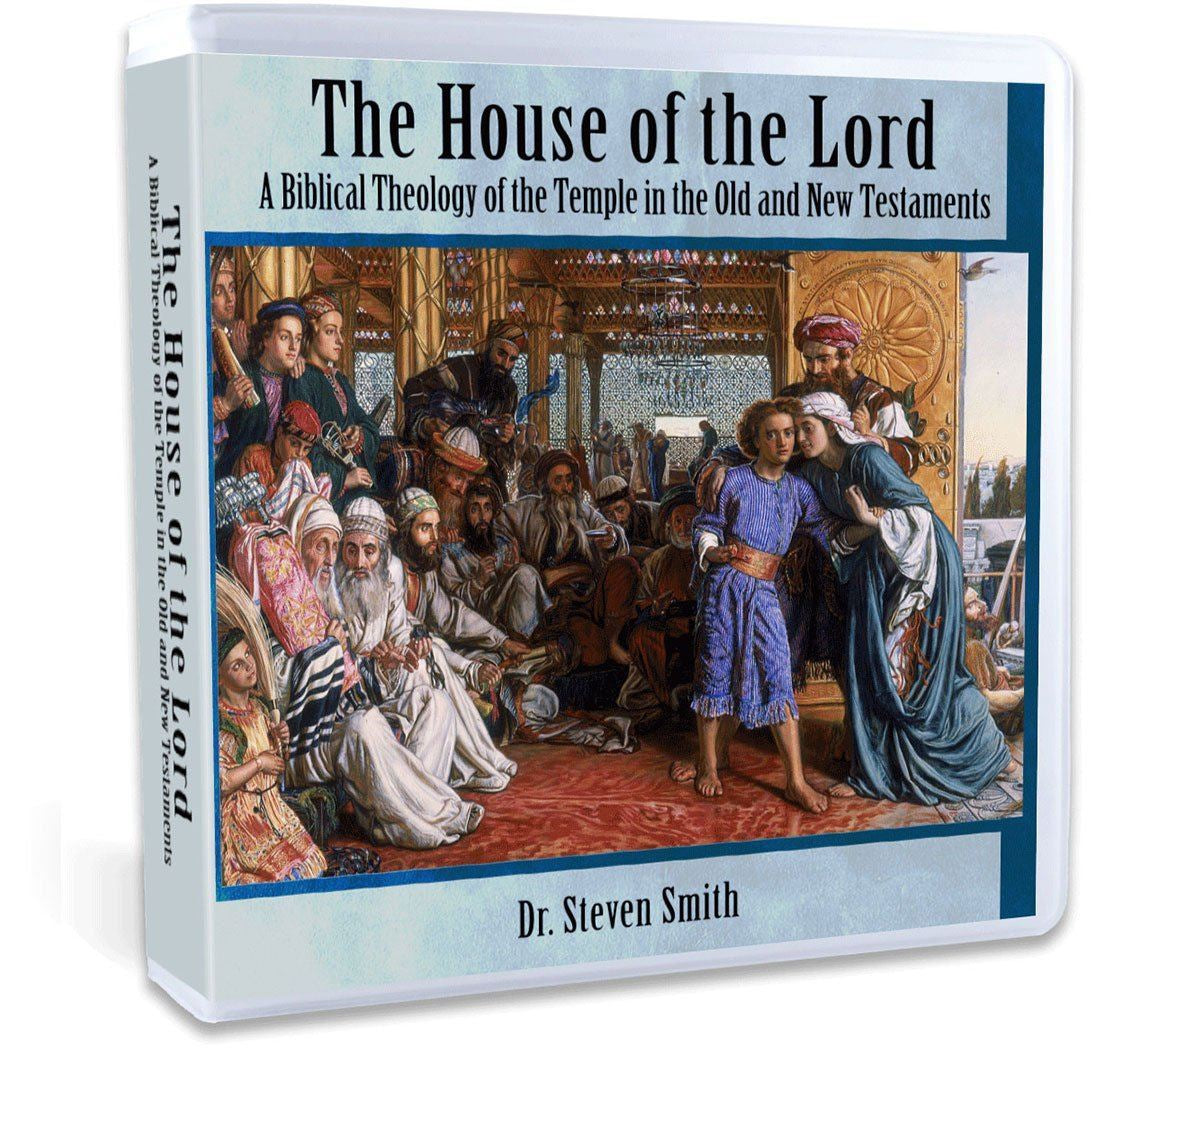 A thorough Bible study on the Temple in the Old and New Testament with Dr. Steven Smith (CD).